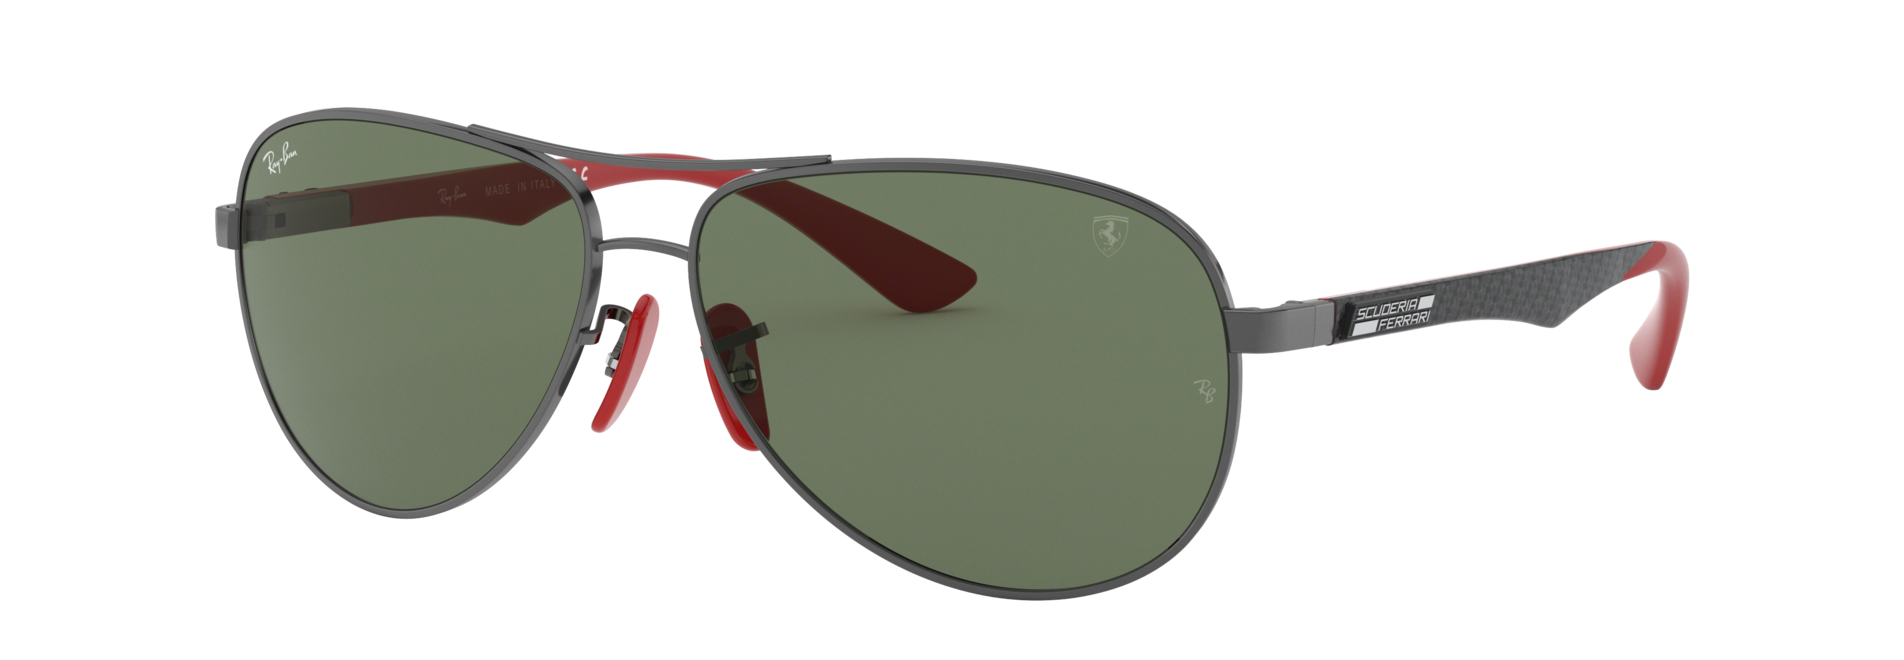 ray ban rb8313 sunglasses in gunmetal with green lenses